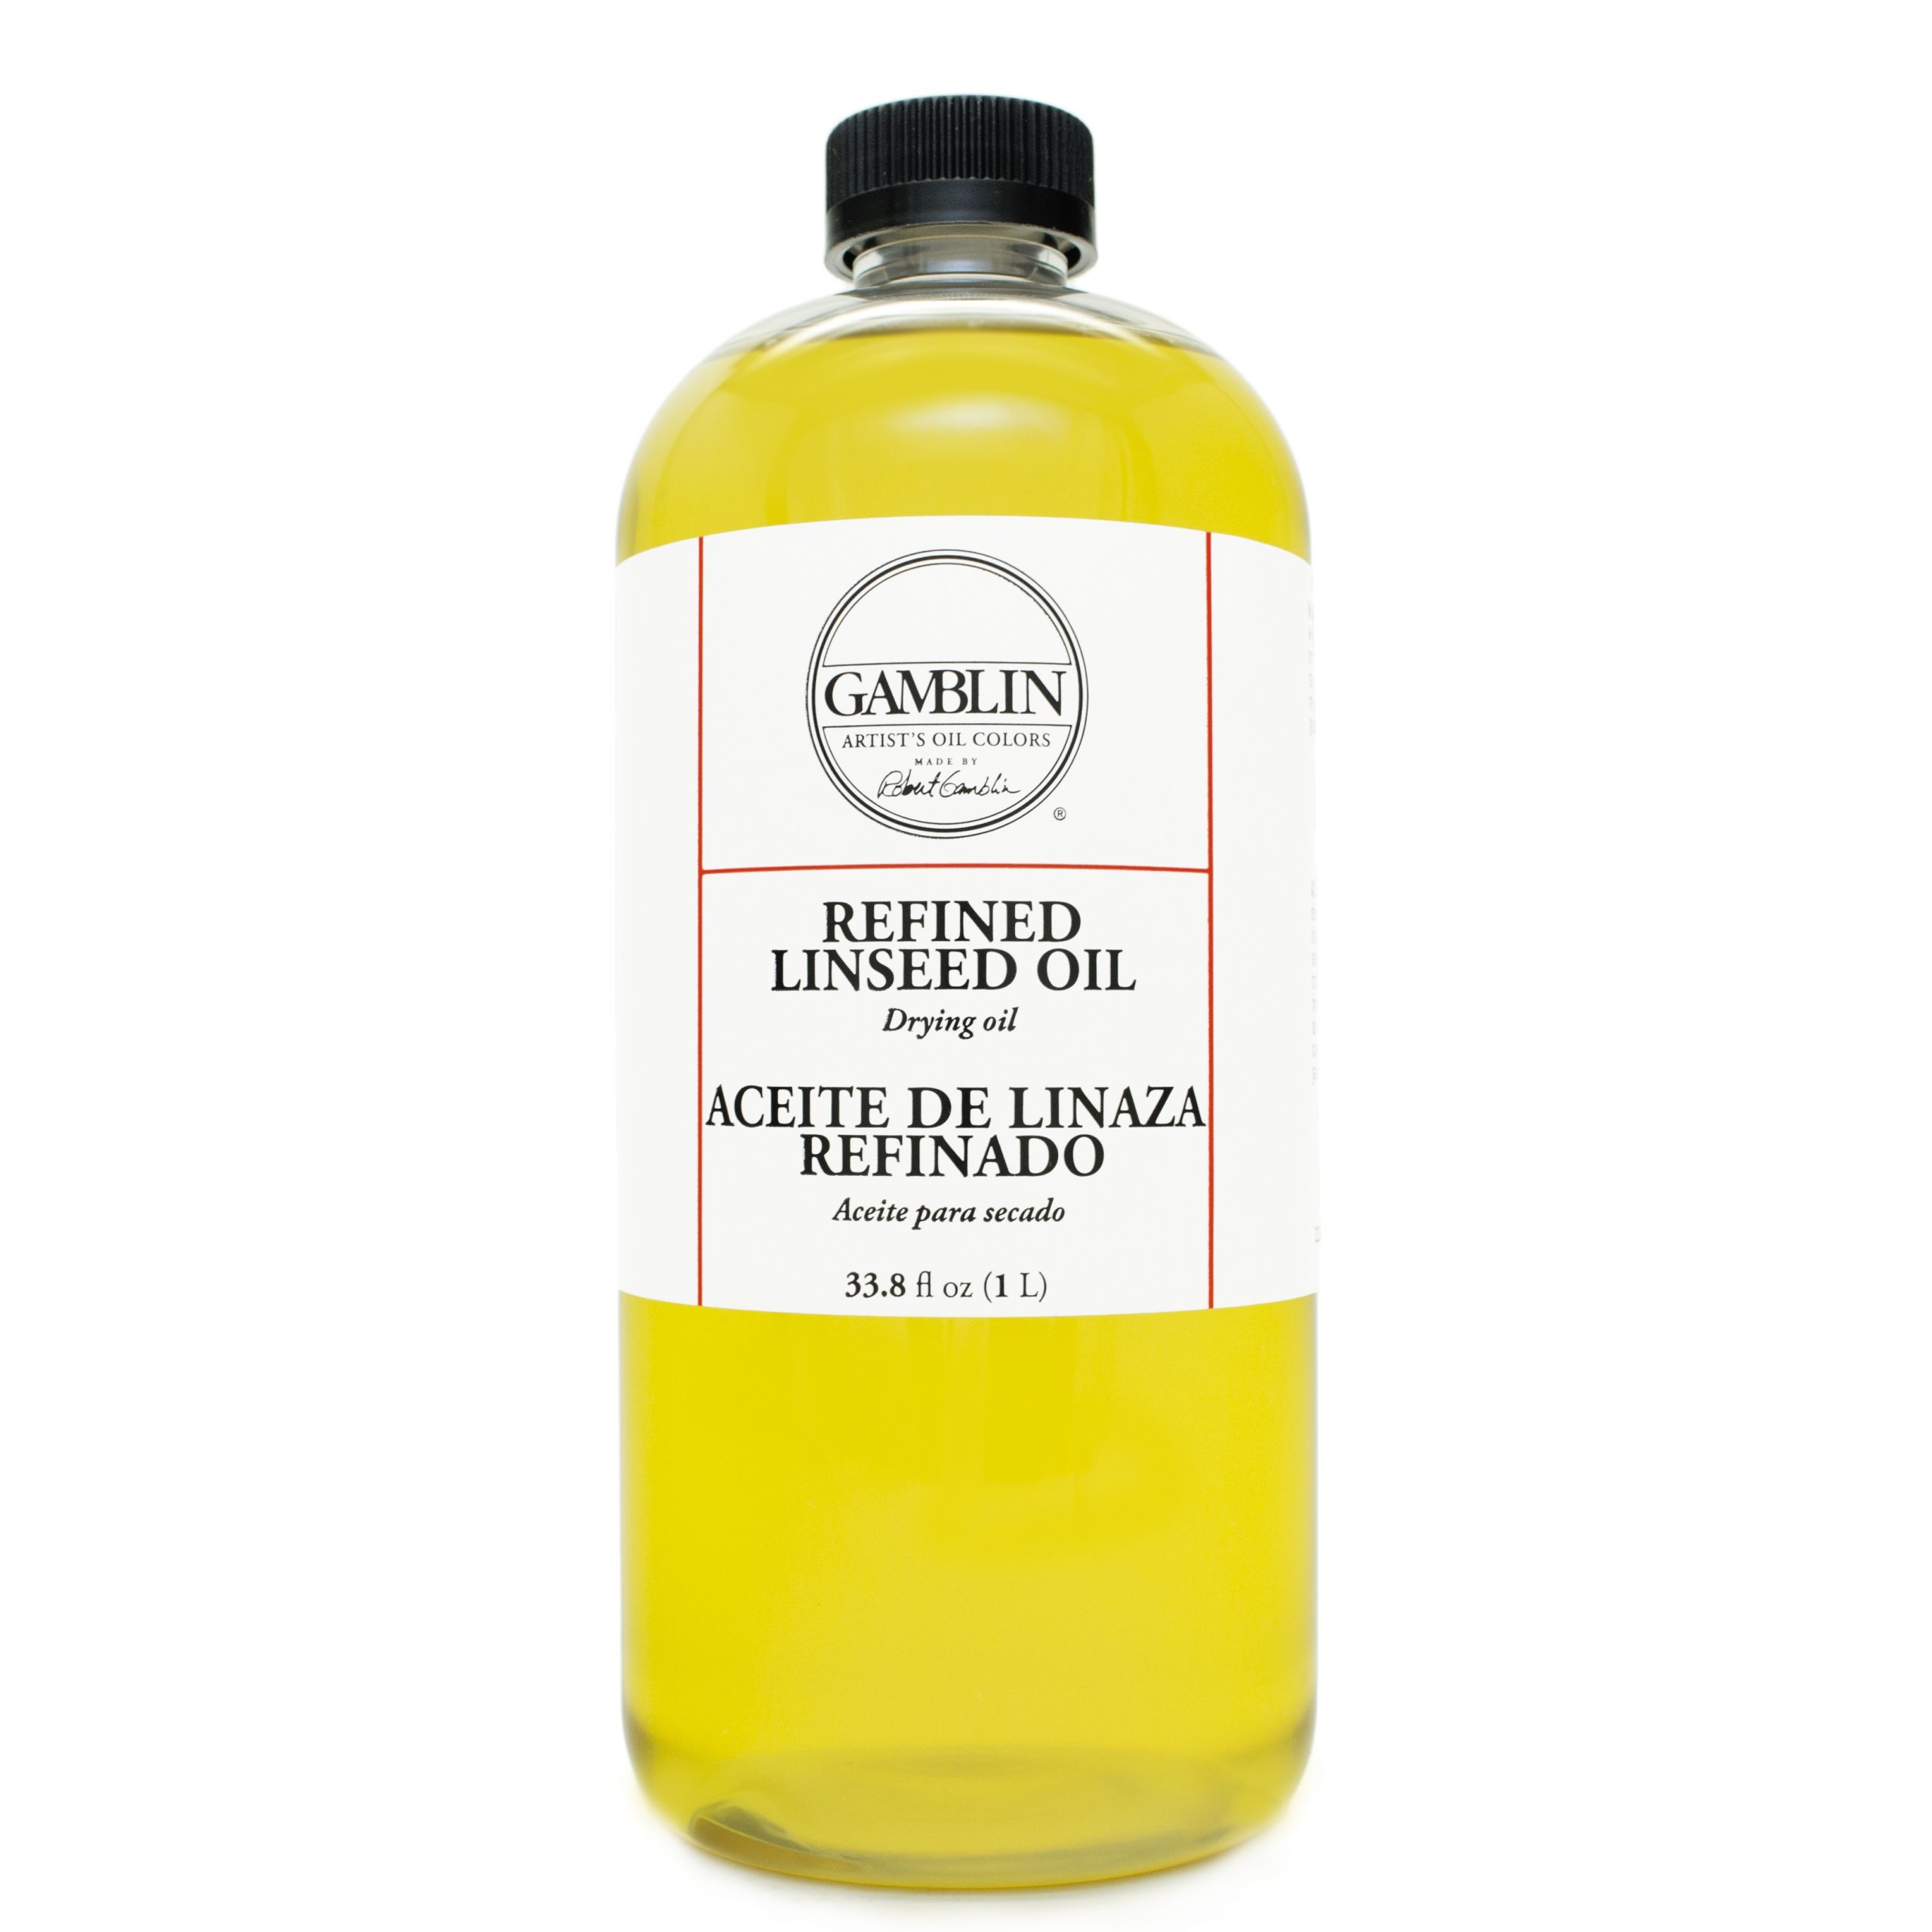 33.8 Refined Linseed Oil